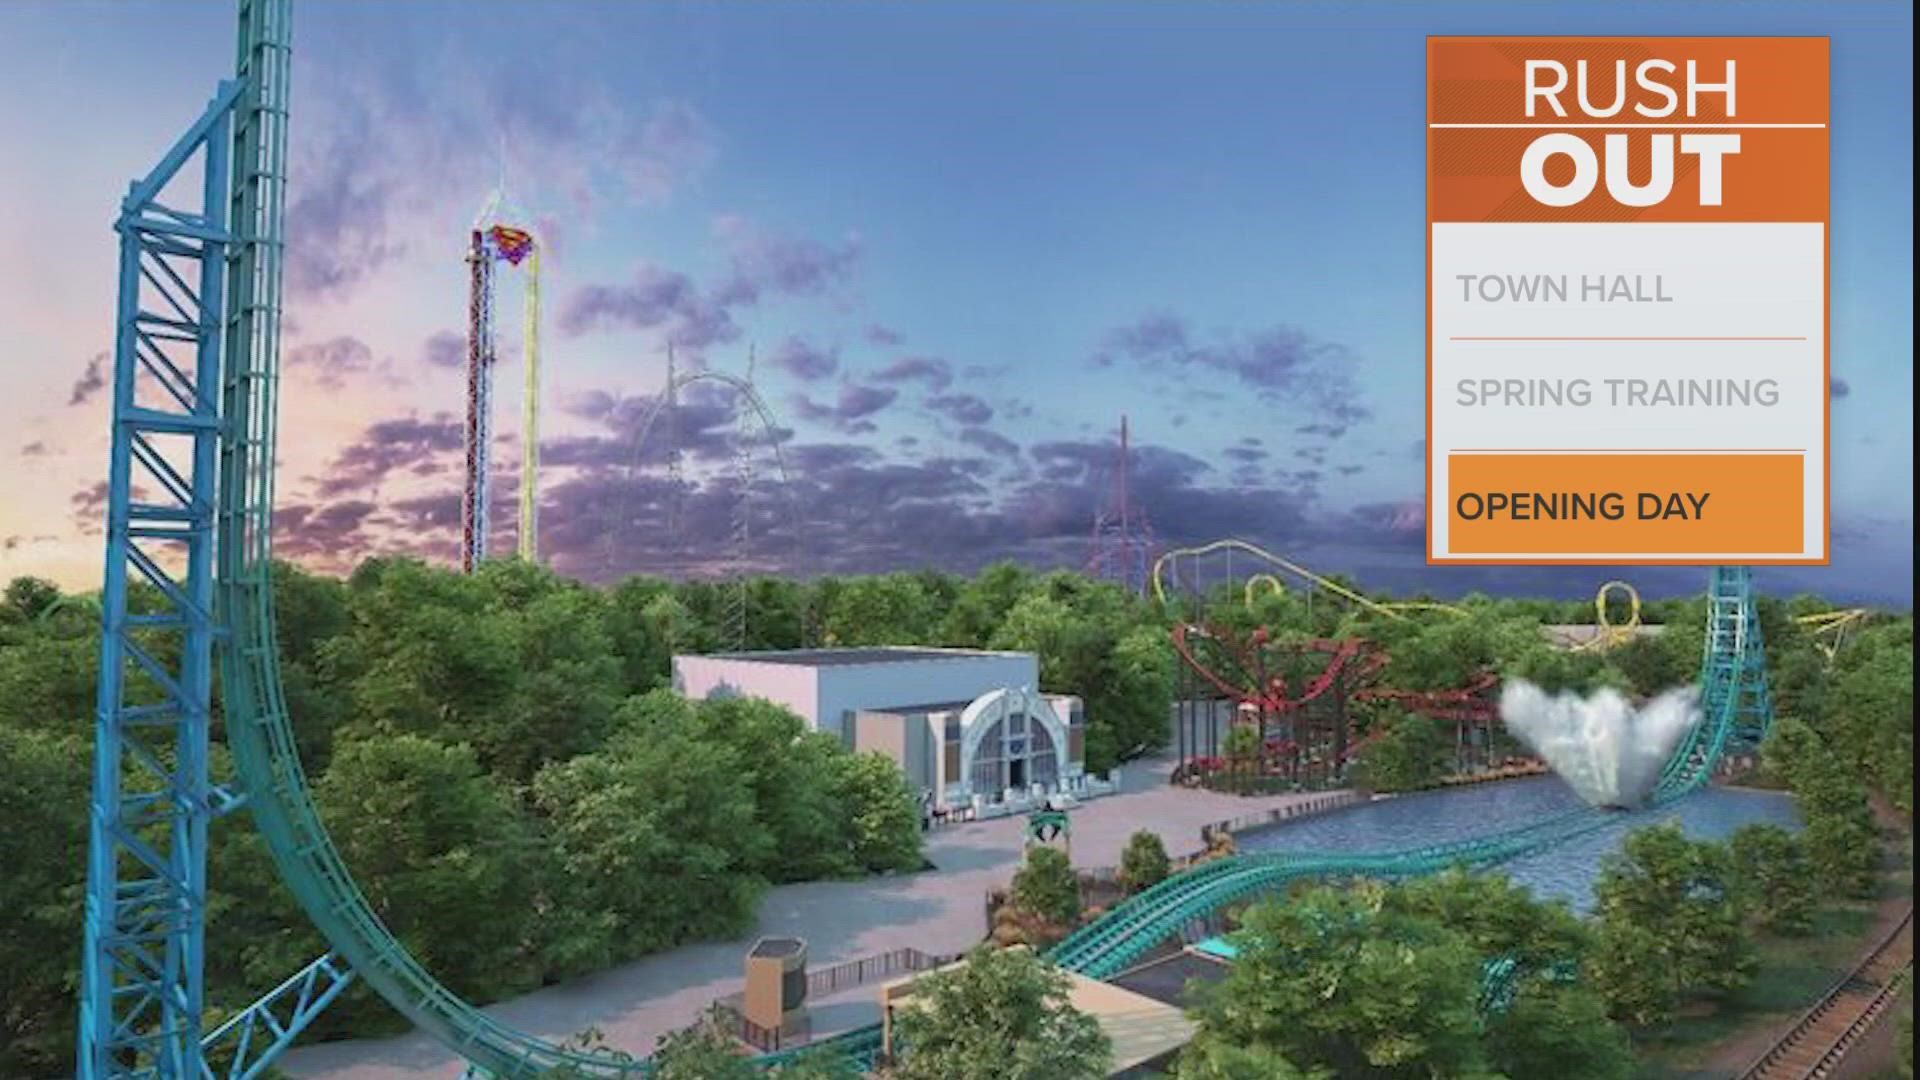 The ride was initially scheduled to open in 2020 but the pandemic delayed its progress.